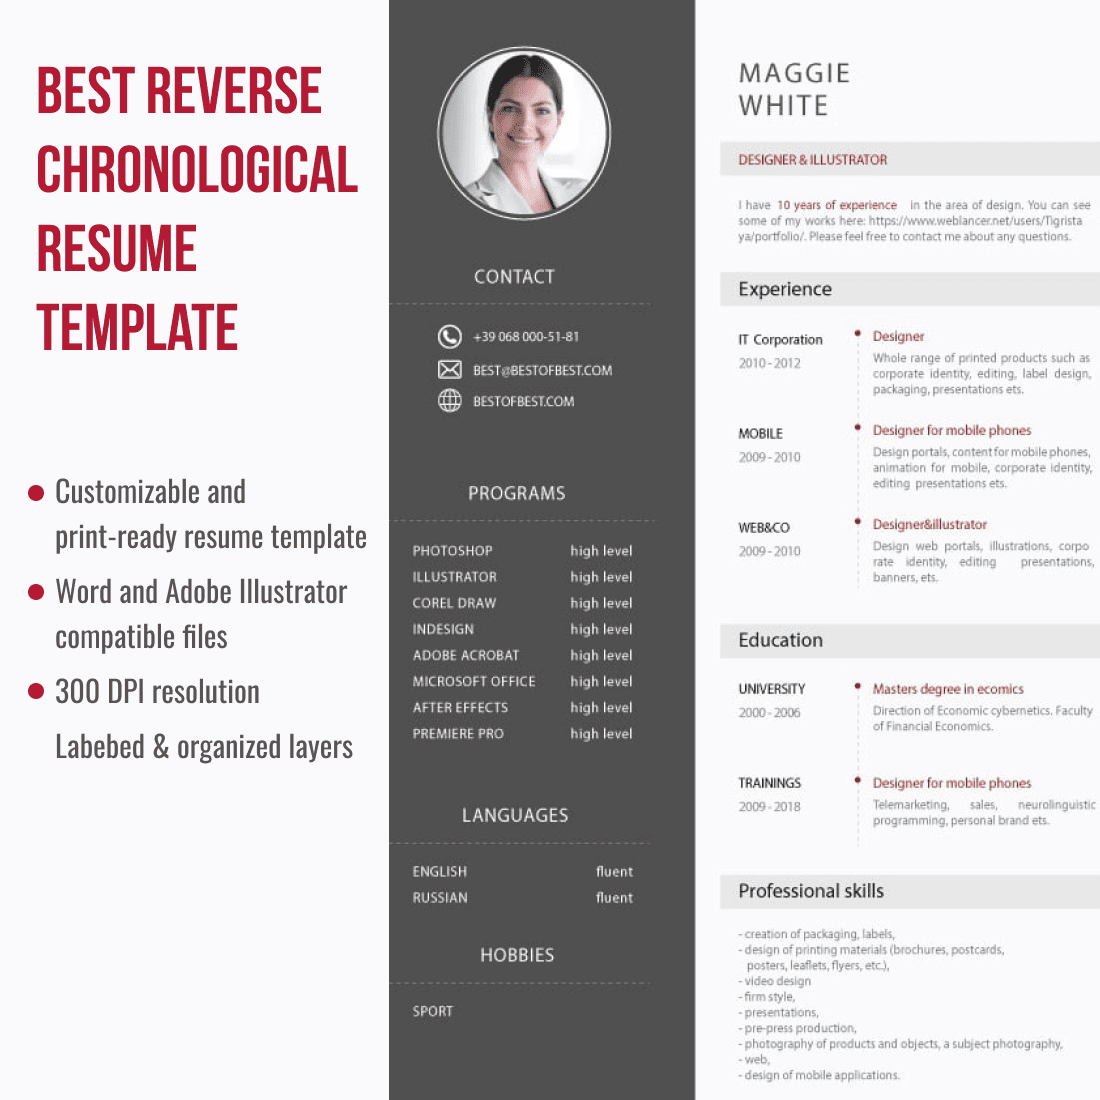 Best Reverse Chronological Resume Template. Cover image.